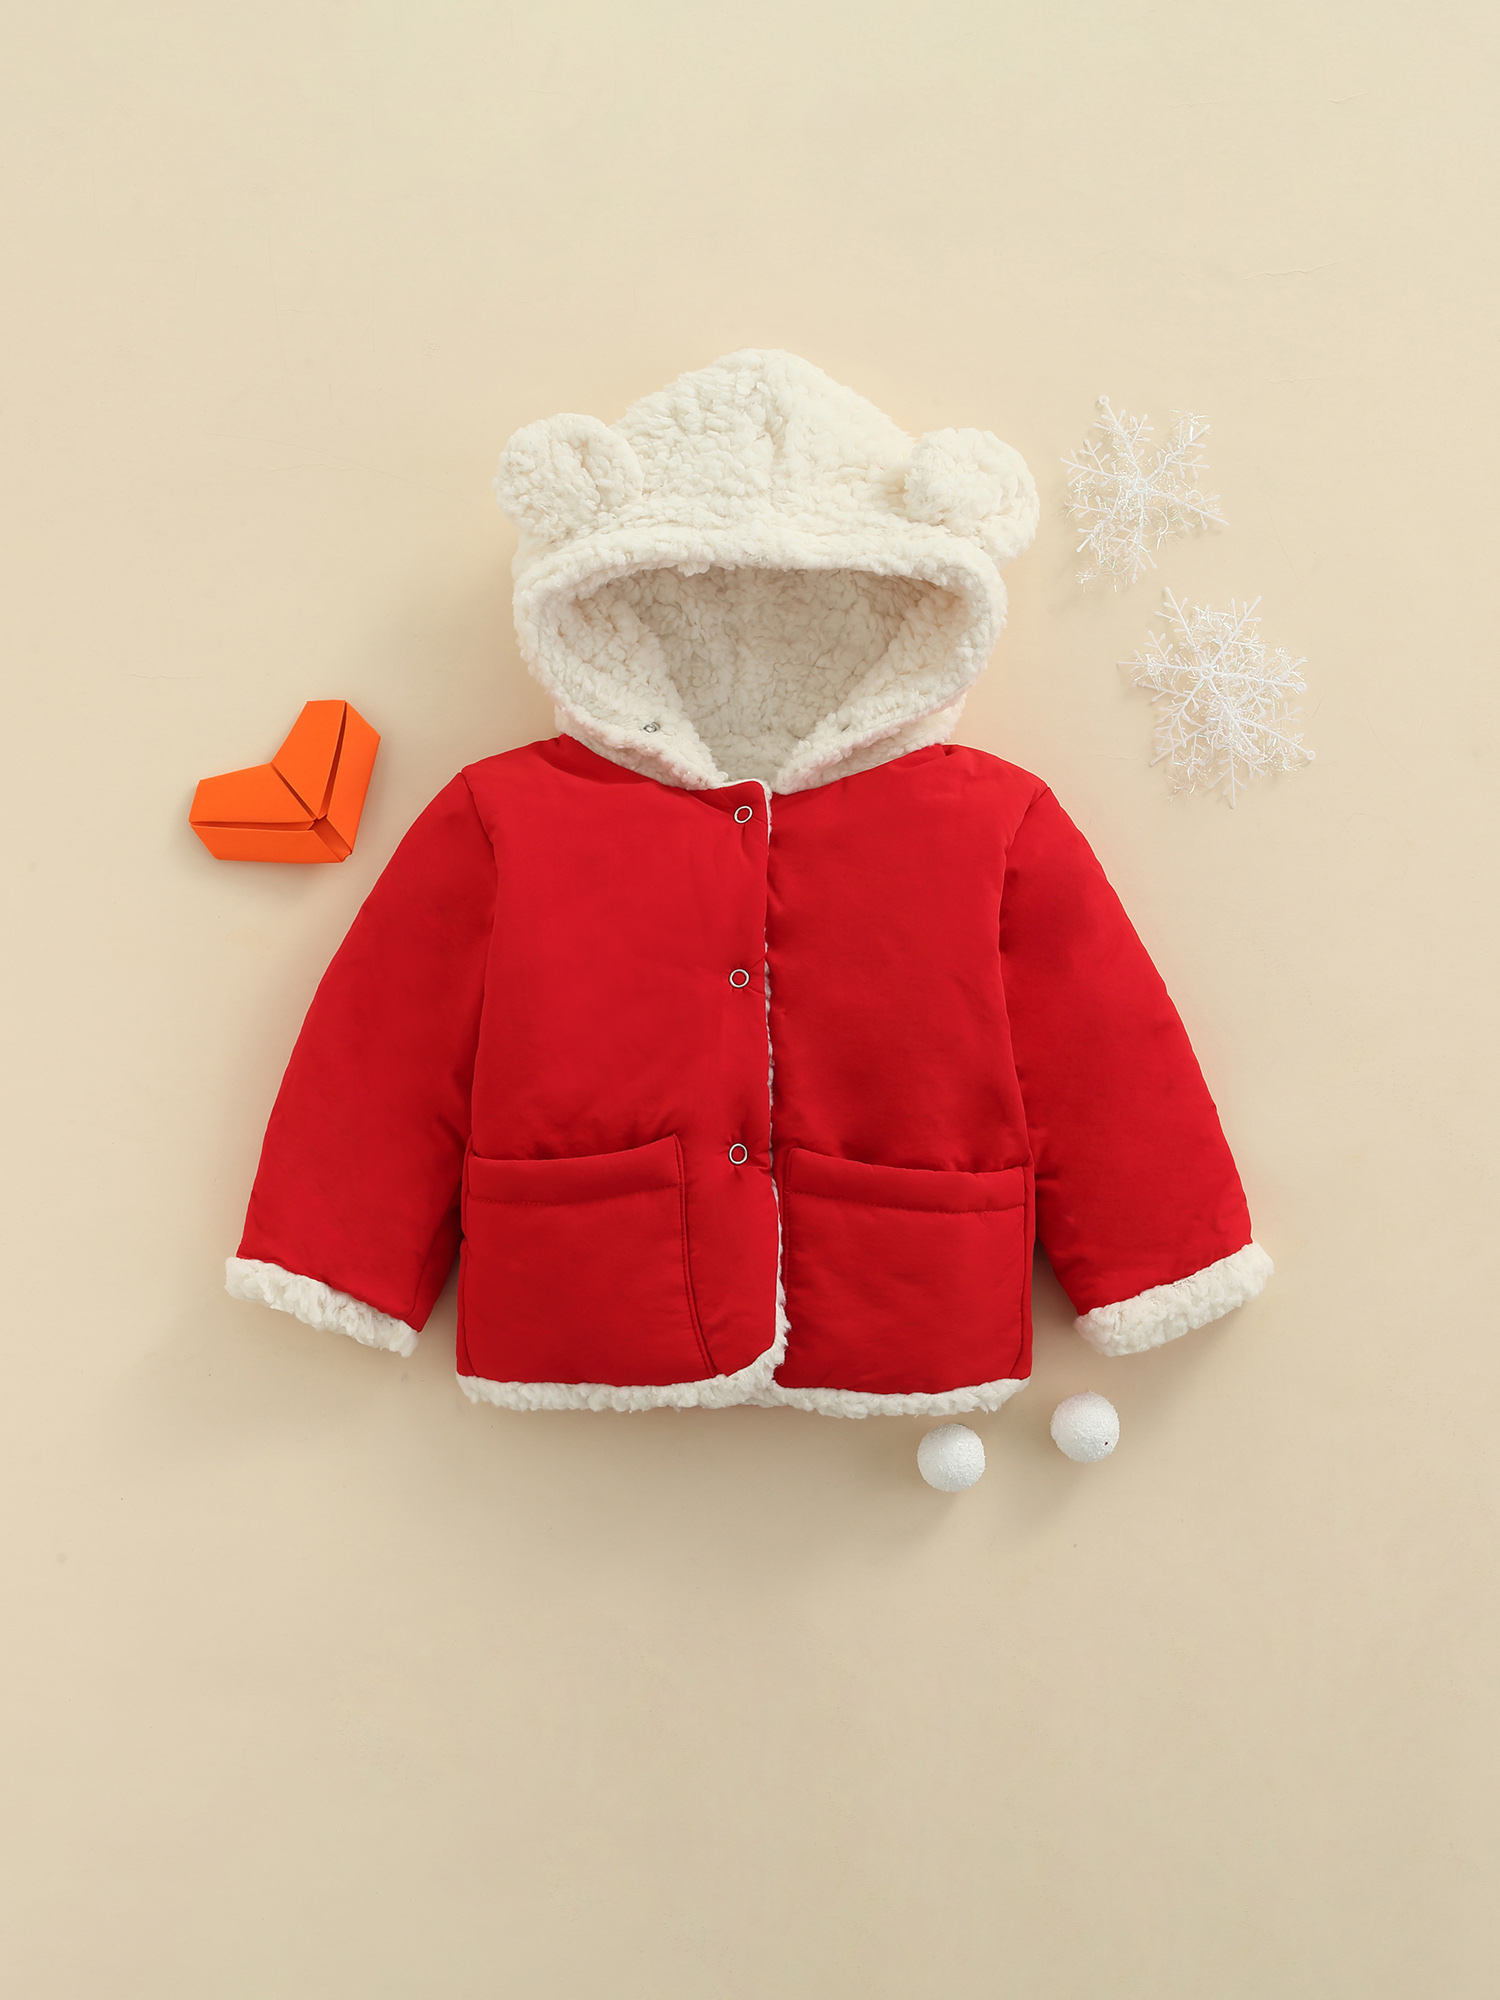 Qiylii Baby Winter Hooded Coat, Long Sleeve Button-down Wadded Jacket - image 2 of 8